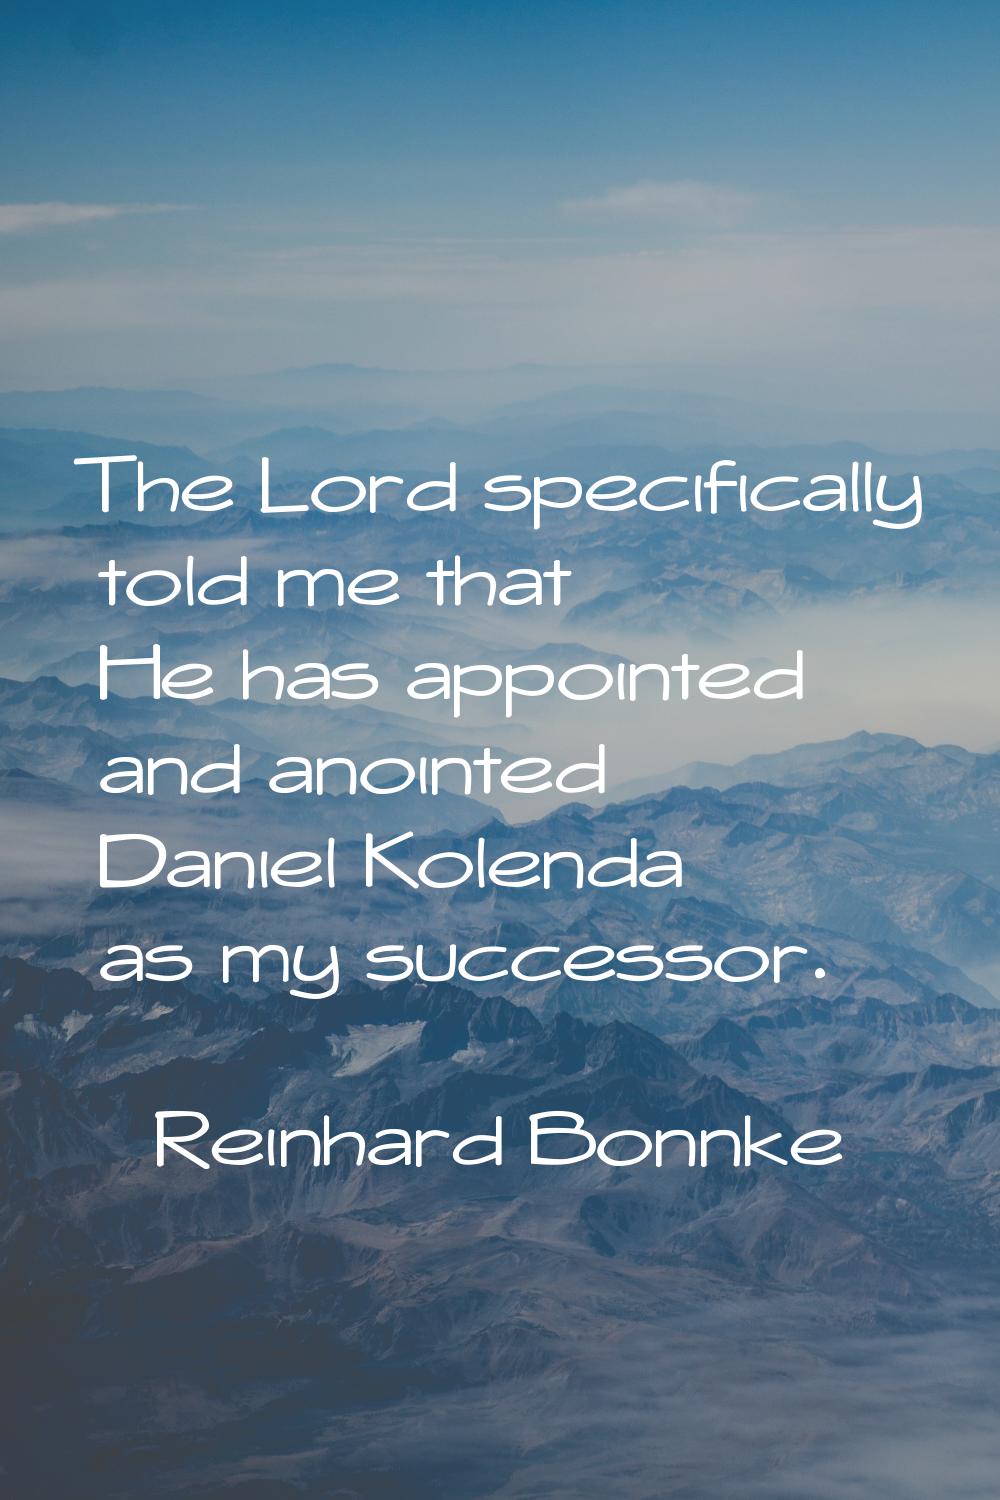 The Lord specifically told me that He has appointed and anointed Daniel Kolenda as my successor.